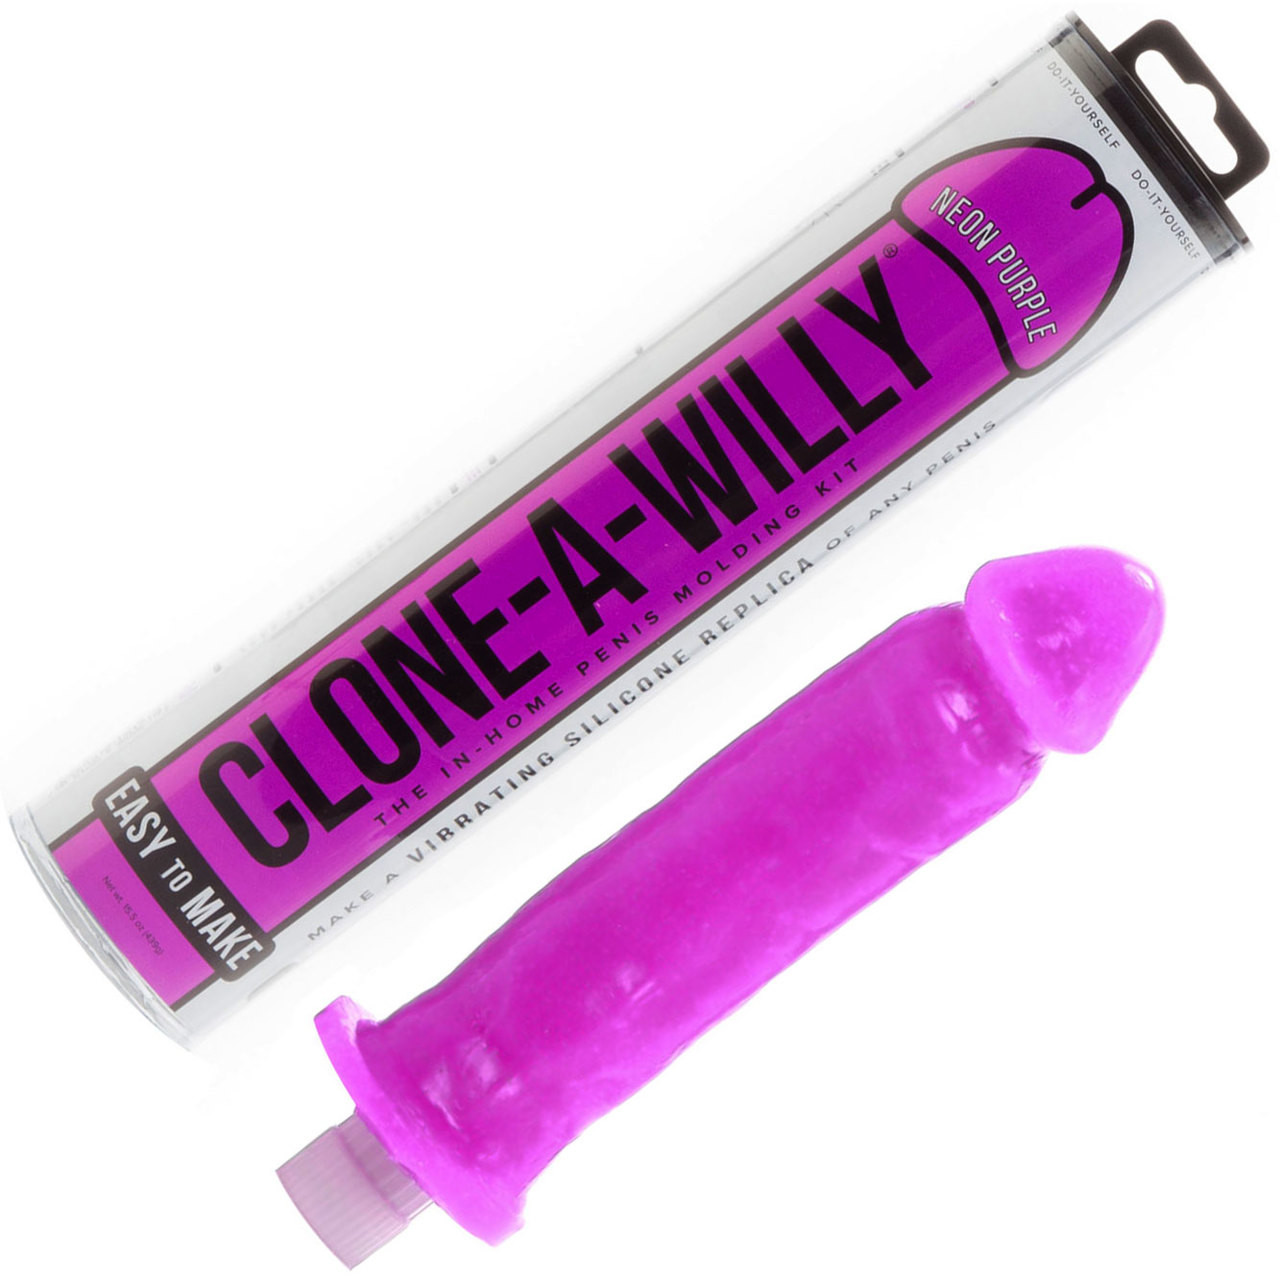 Clone-A-Willy Make Your Own Vibrating Silicone Dildo